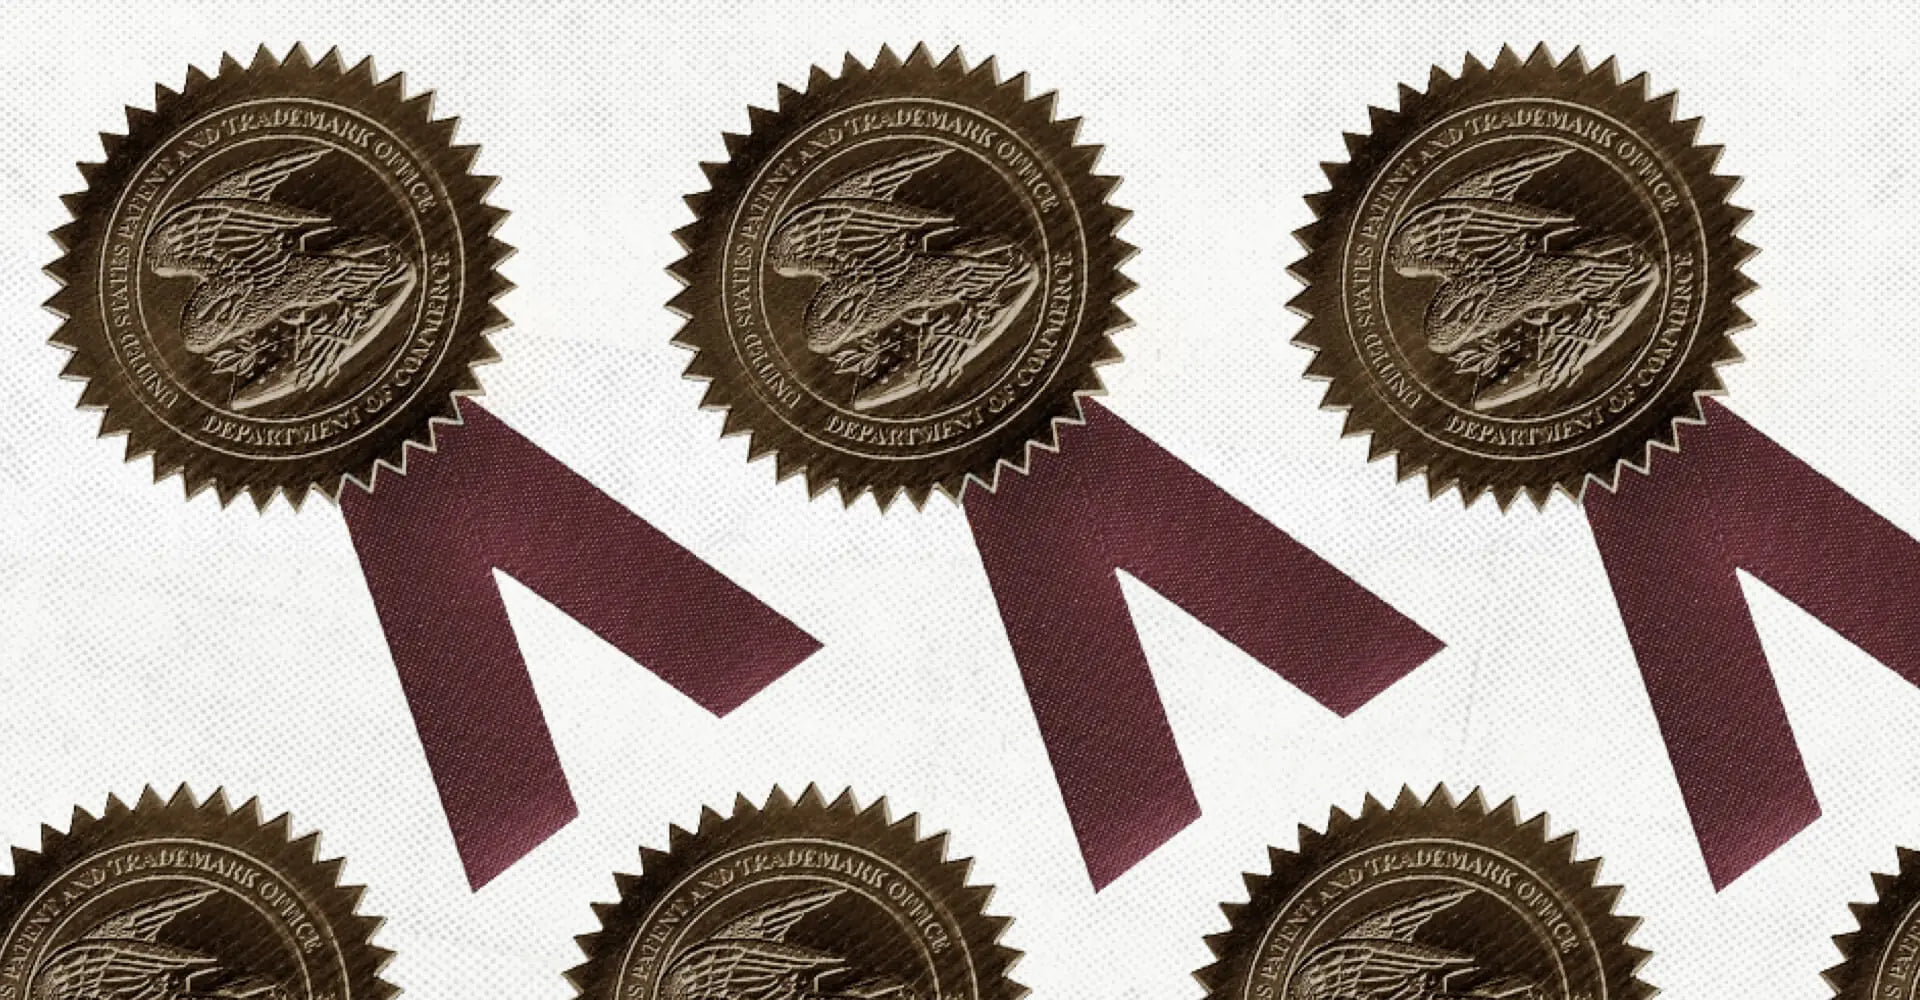 A group of gold seals with ribbons